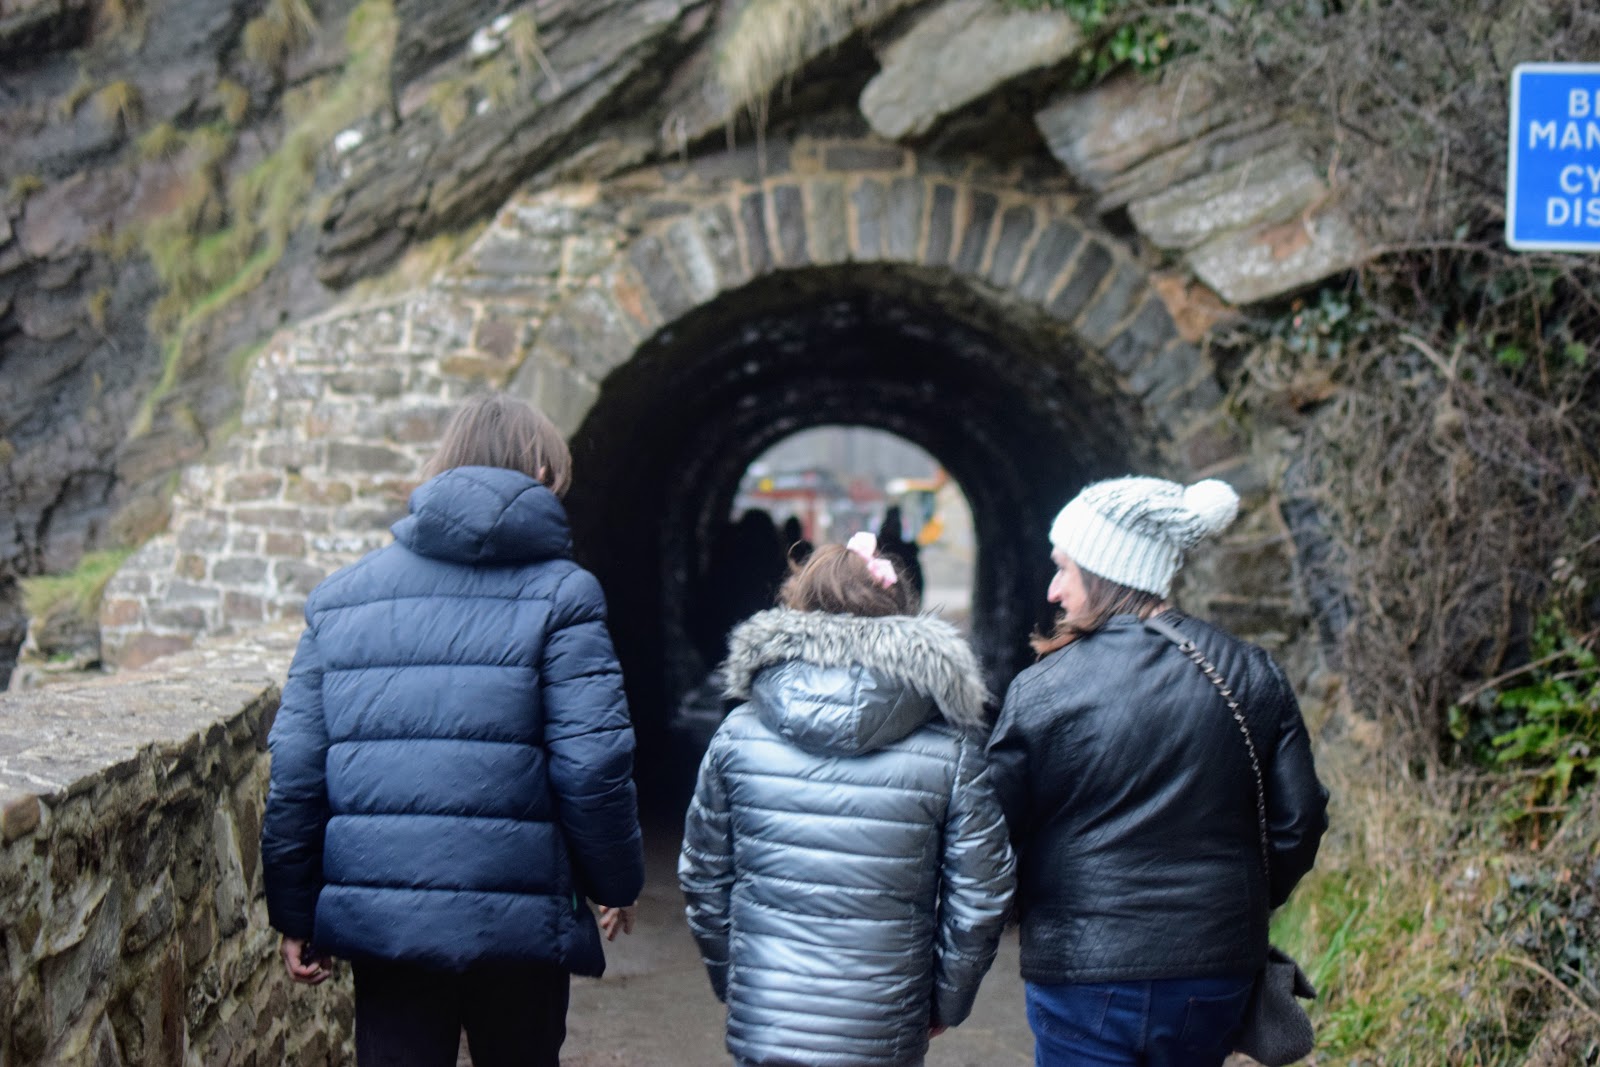 , Days Out:  Snapshots of the Saundersfoot Tunnel Walks, Pembrokeshire